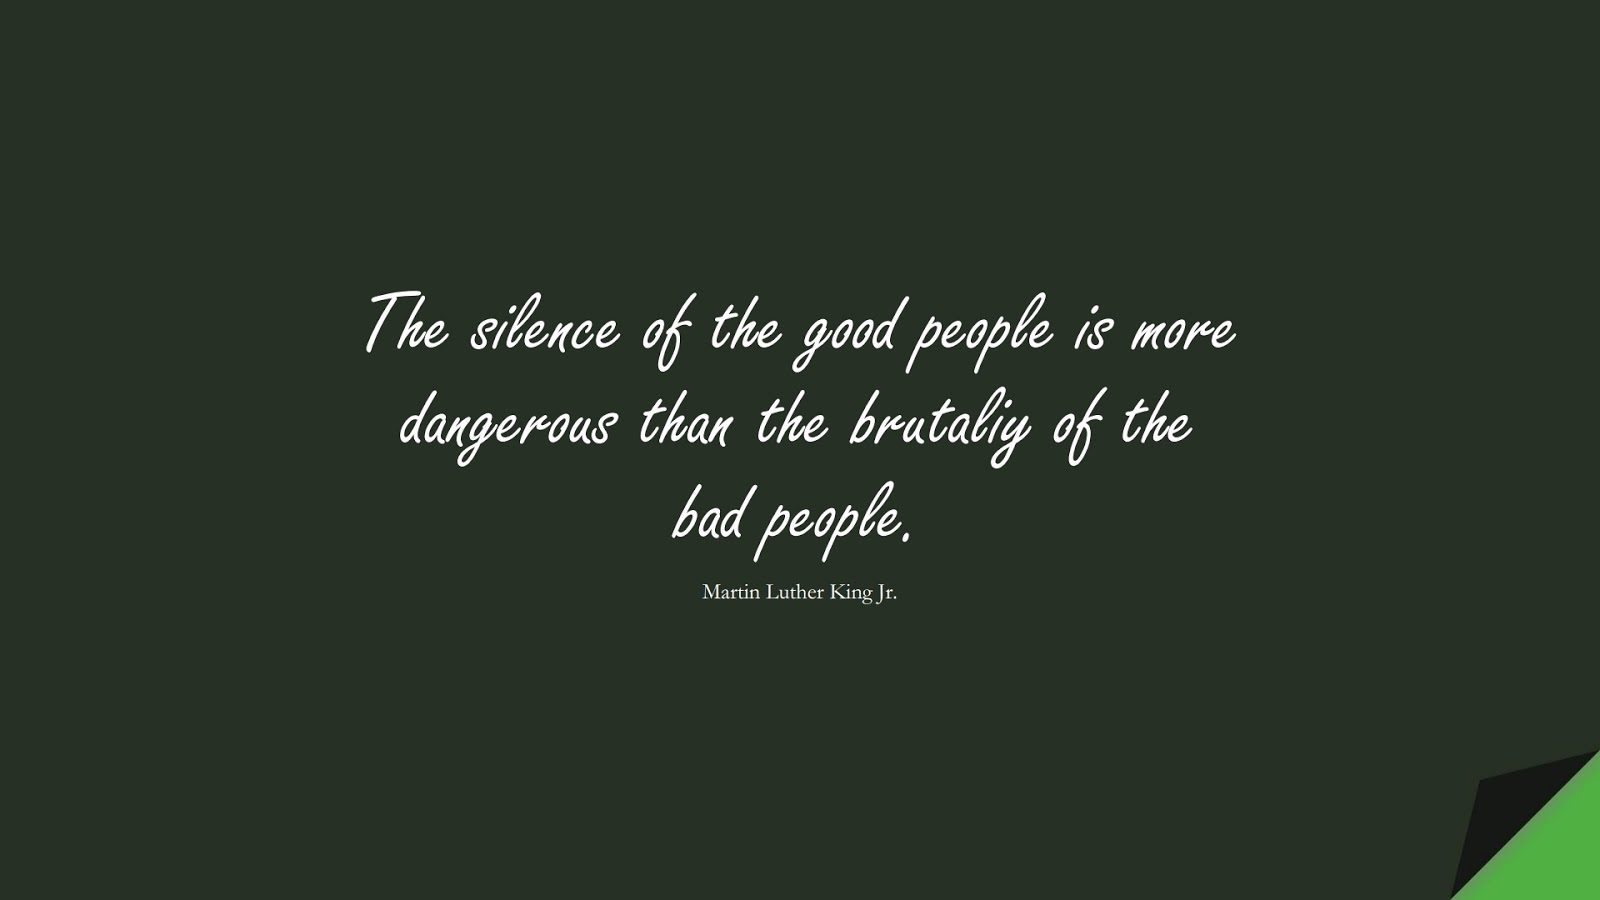 The silence of the good people is more dangerous than the brutaliy of the bad people. (Martin Luther King Jr.);  #MartinLutherKingJrQuotes